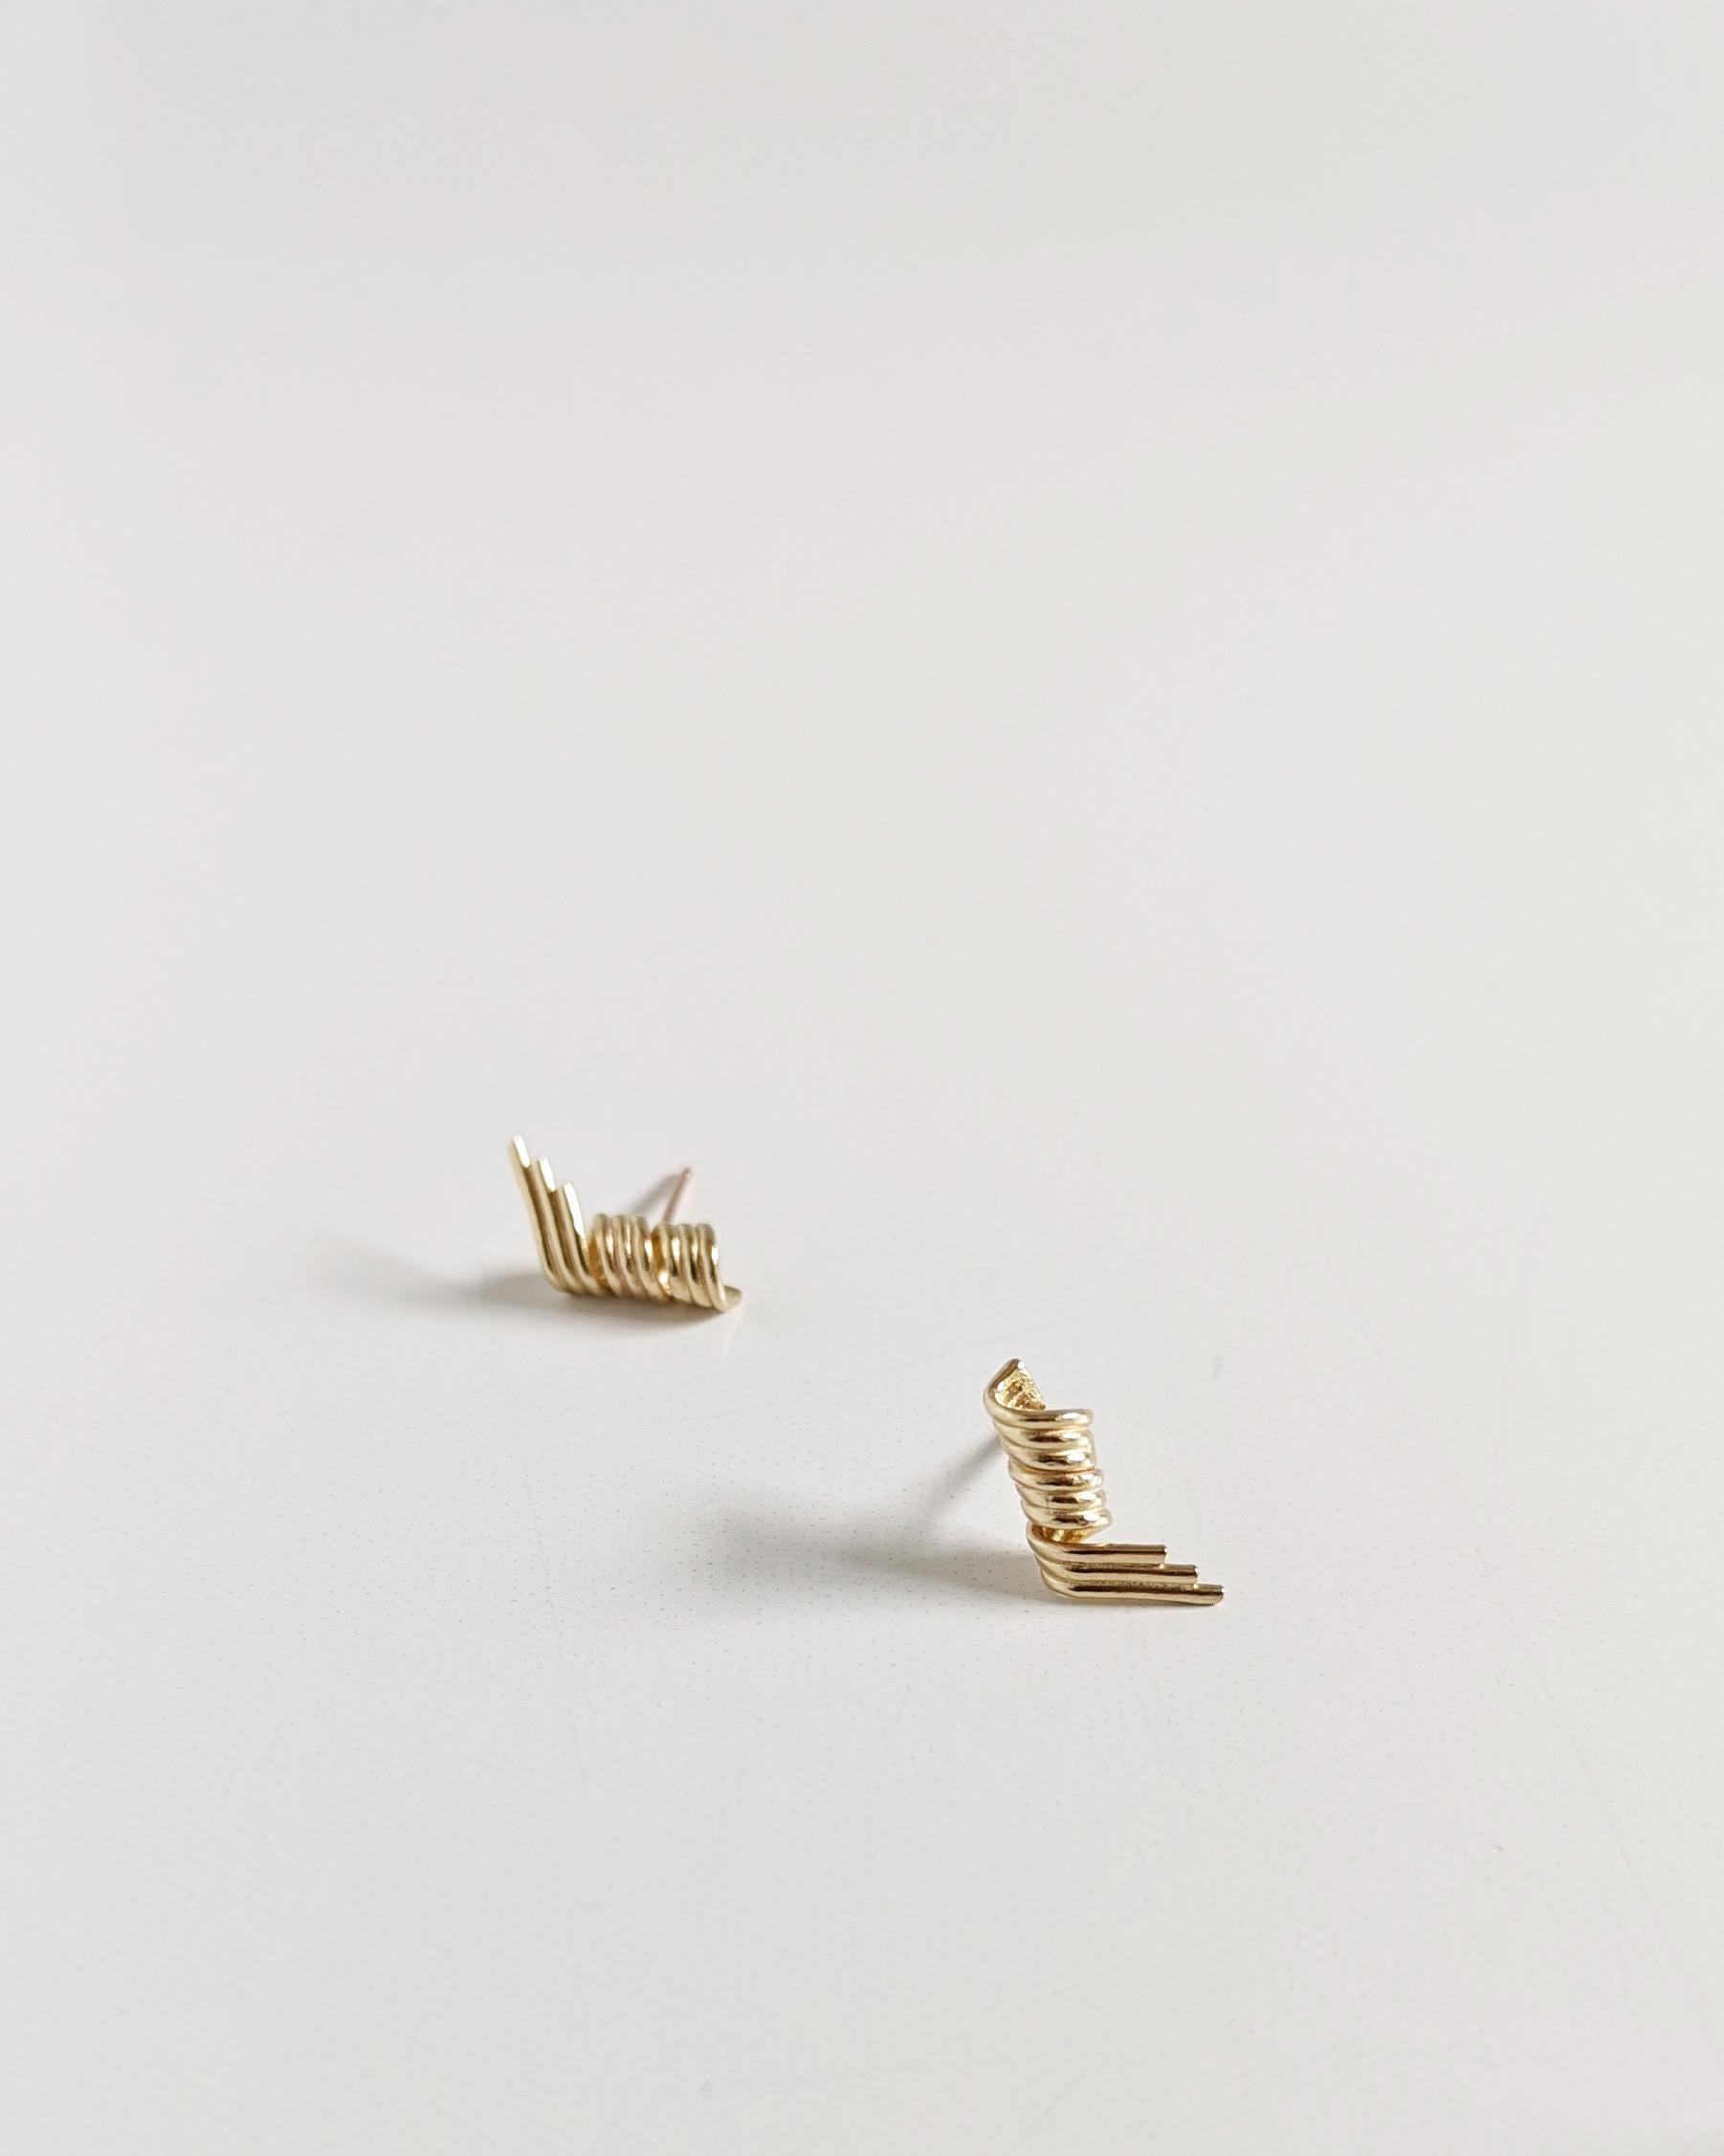 A three-dimensional twist to bar studs… The satisfying curves of spiraling loops rolled into a tubular bar add a unique twist and energy. The corkscrew-style earrings add finesse and effortlessly elevate your outfit.